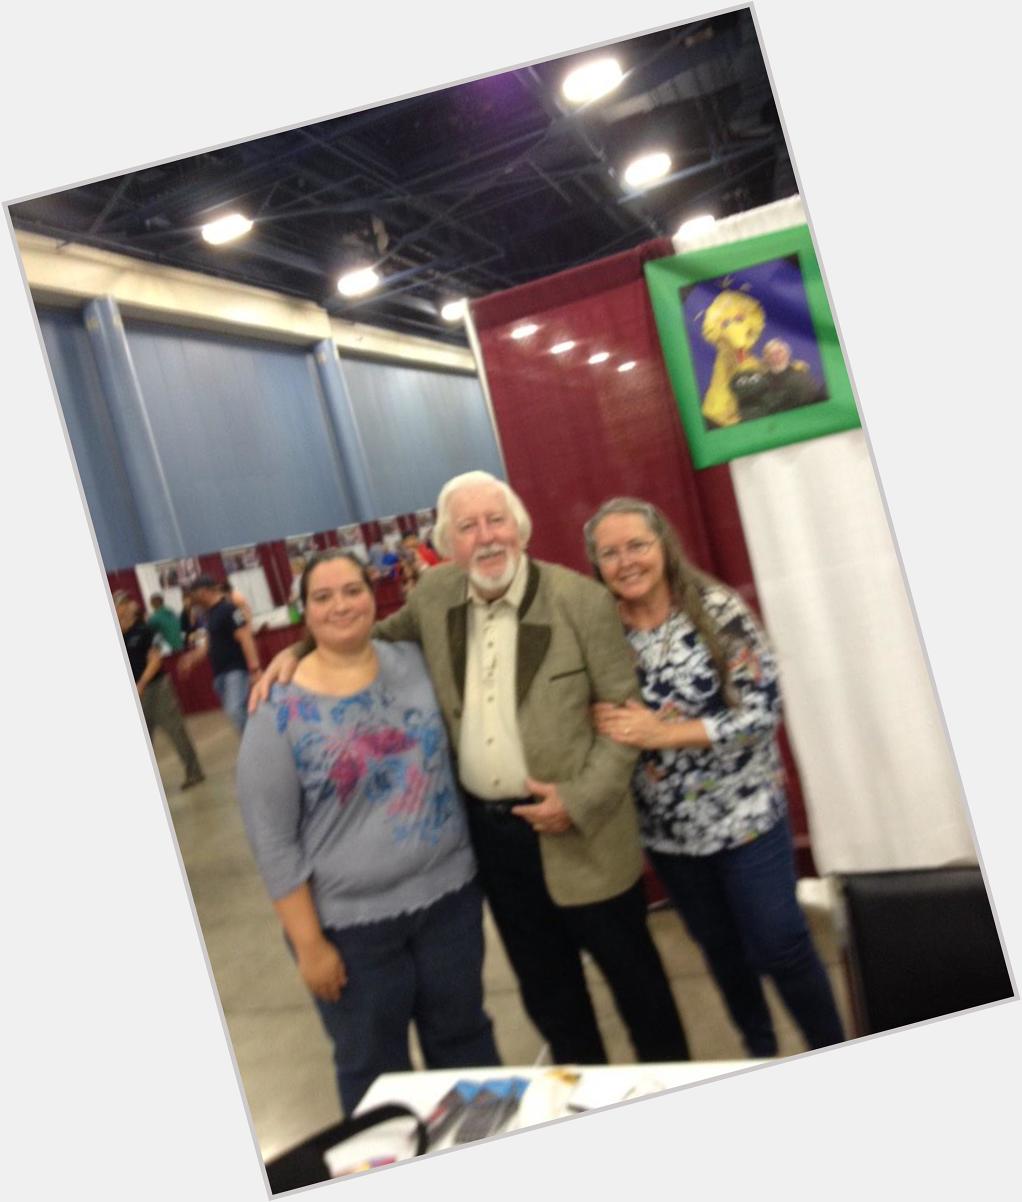 Happy birthday to Caroll Spinney from Here\s a picture with me, Caroll, and his wife at 